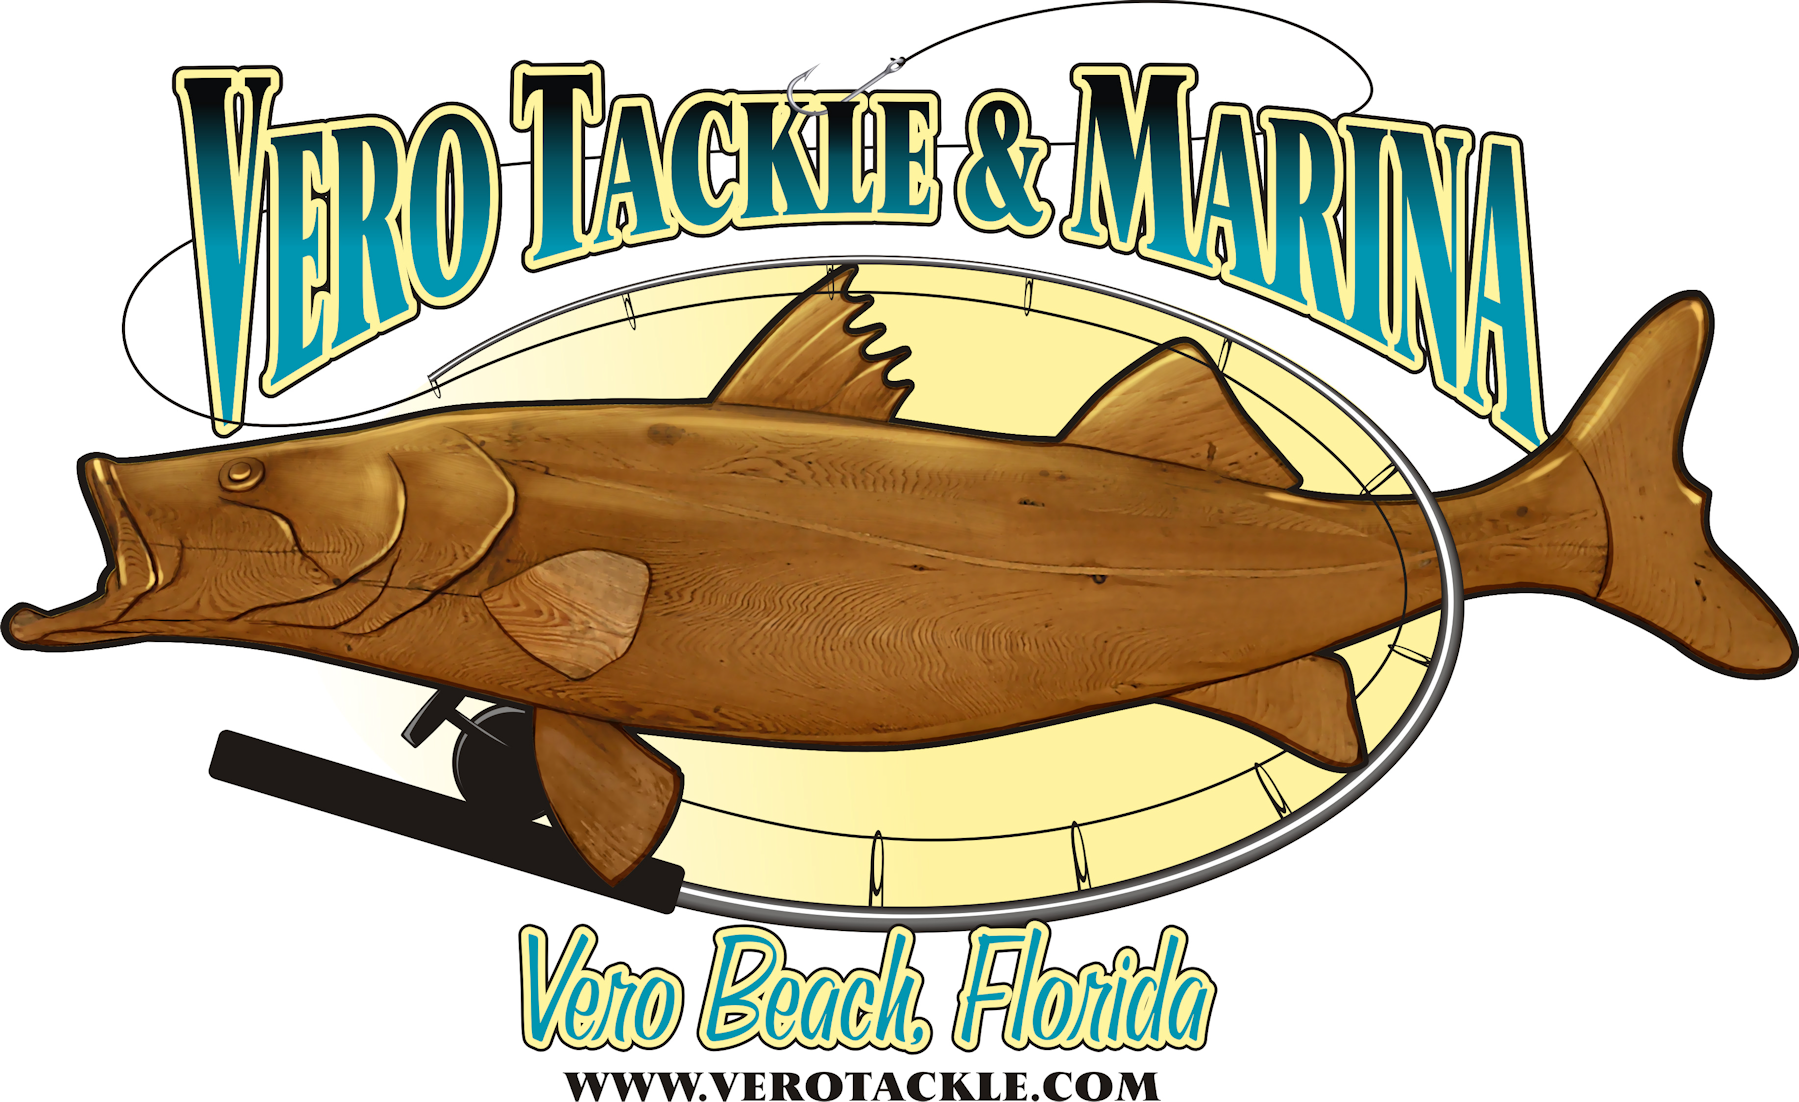 Fishing Charters, fishing gear, tackle and more!